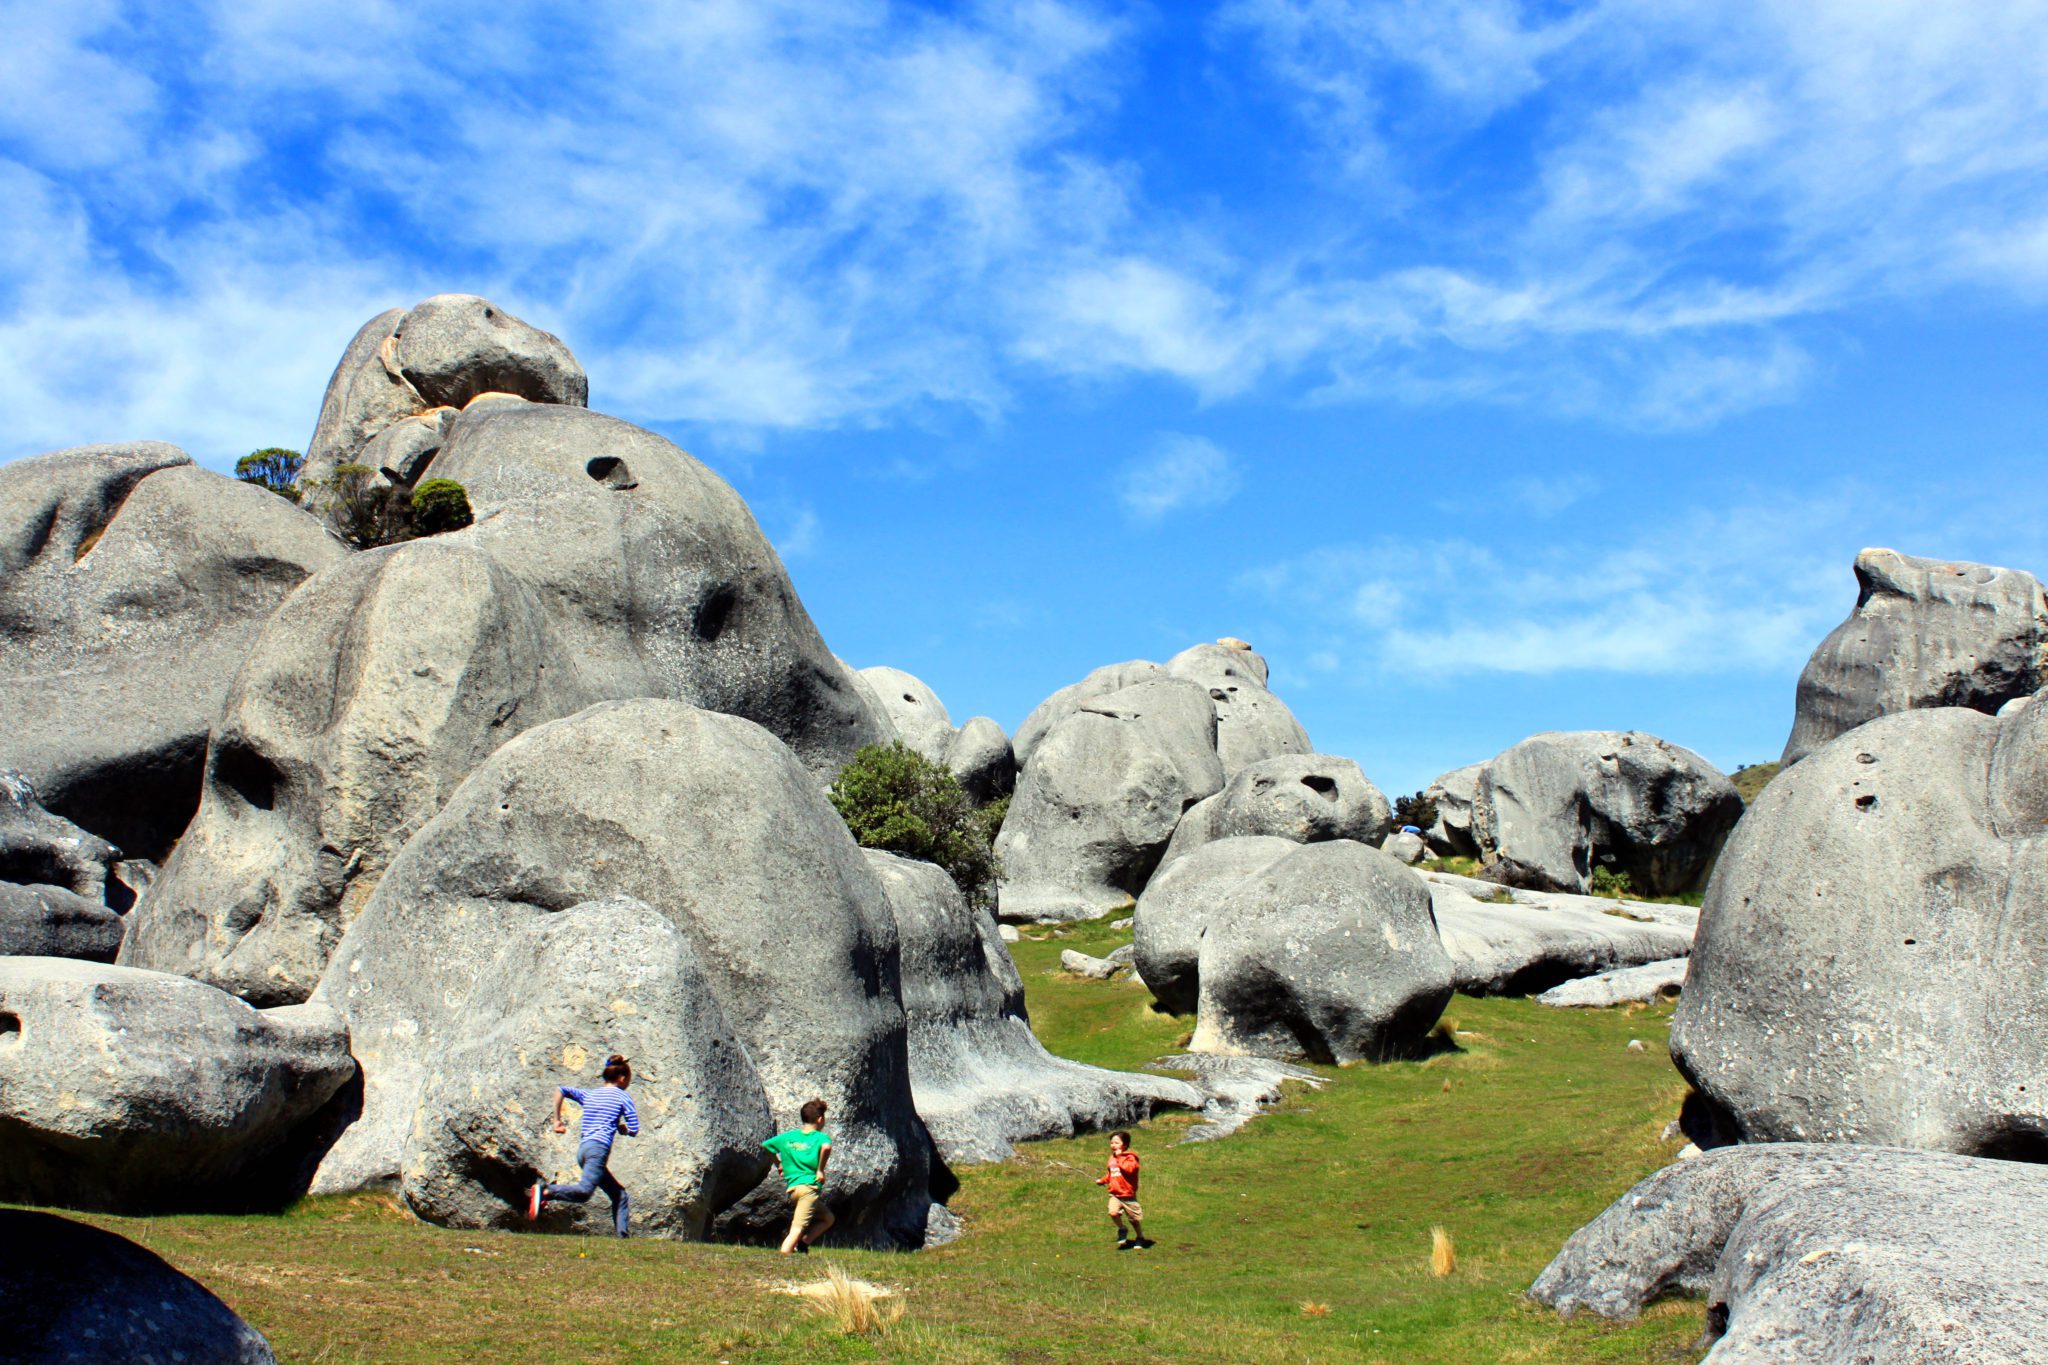 You could spend hours getting lost exploring at Castle Hill- Visit these 17 underrated spots on New Zealand's South Island- Where to go in New Zealand #newzealand #southisland #castlehill